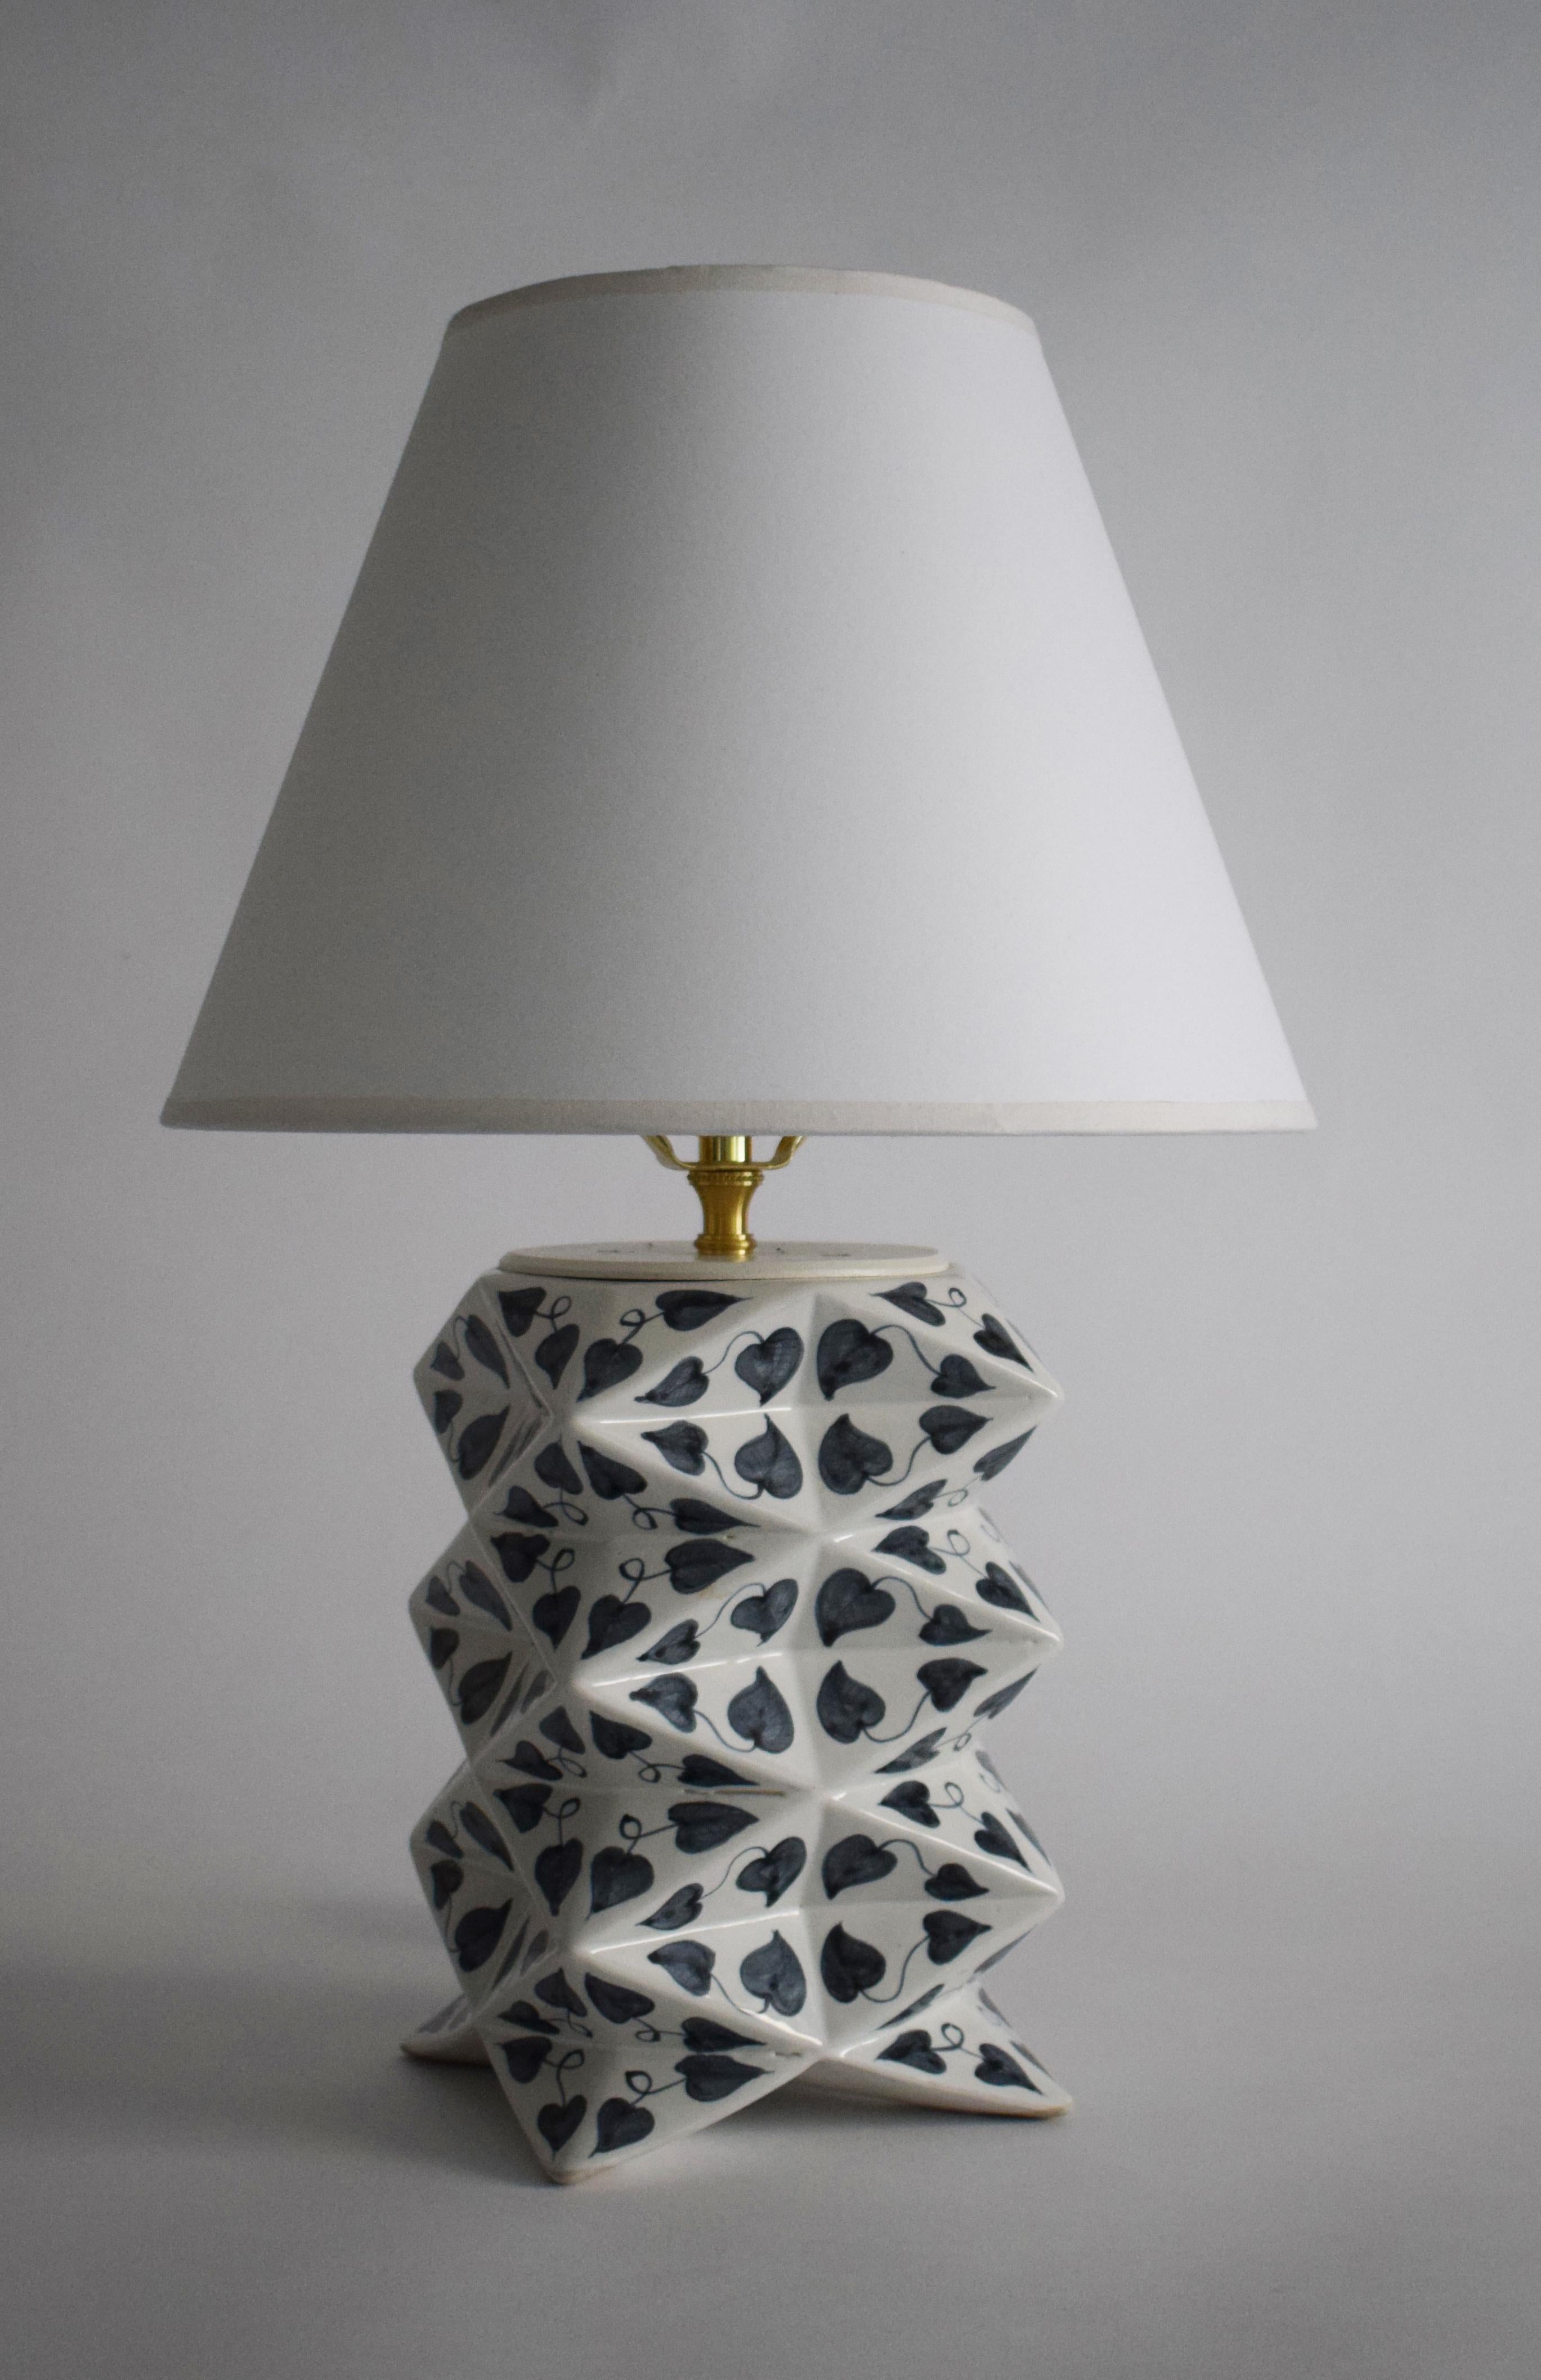 Hand-painted Ceramic Vietnamese Leaves Origami Table Lamp by James Hicks In Excellent Condition For Sale In New York, NY